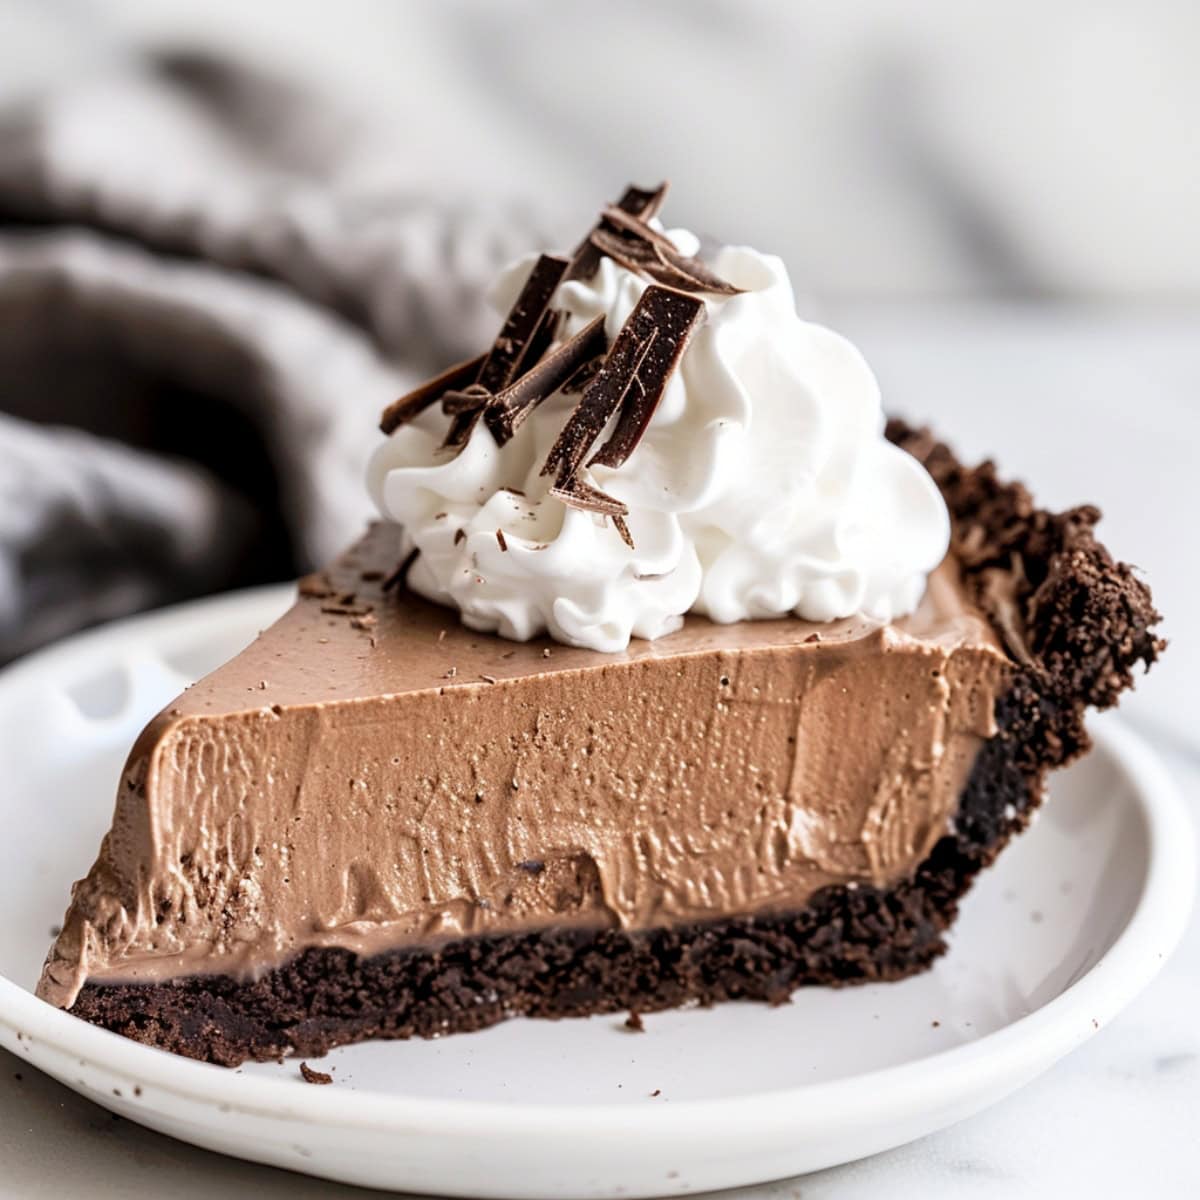 A slice of French silk pie on a white plate, showing the smooth layers of chocolate filling, topped with whipped cream